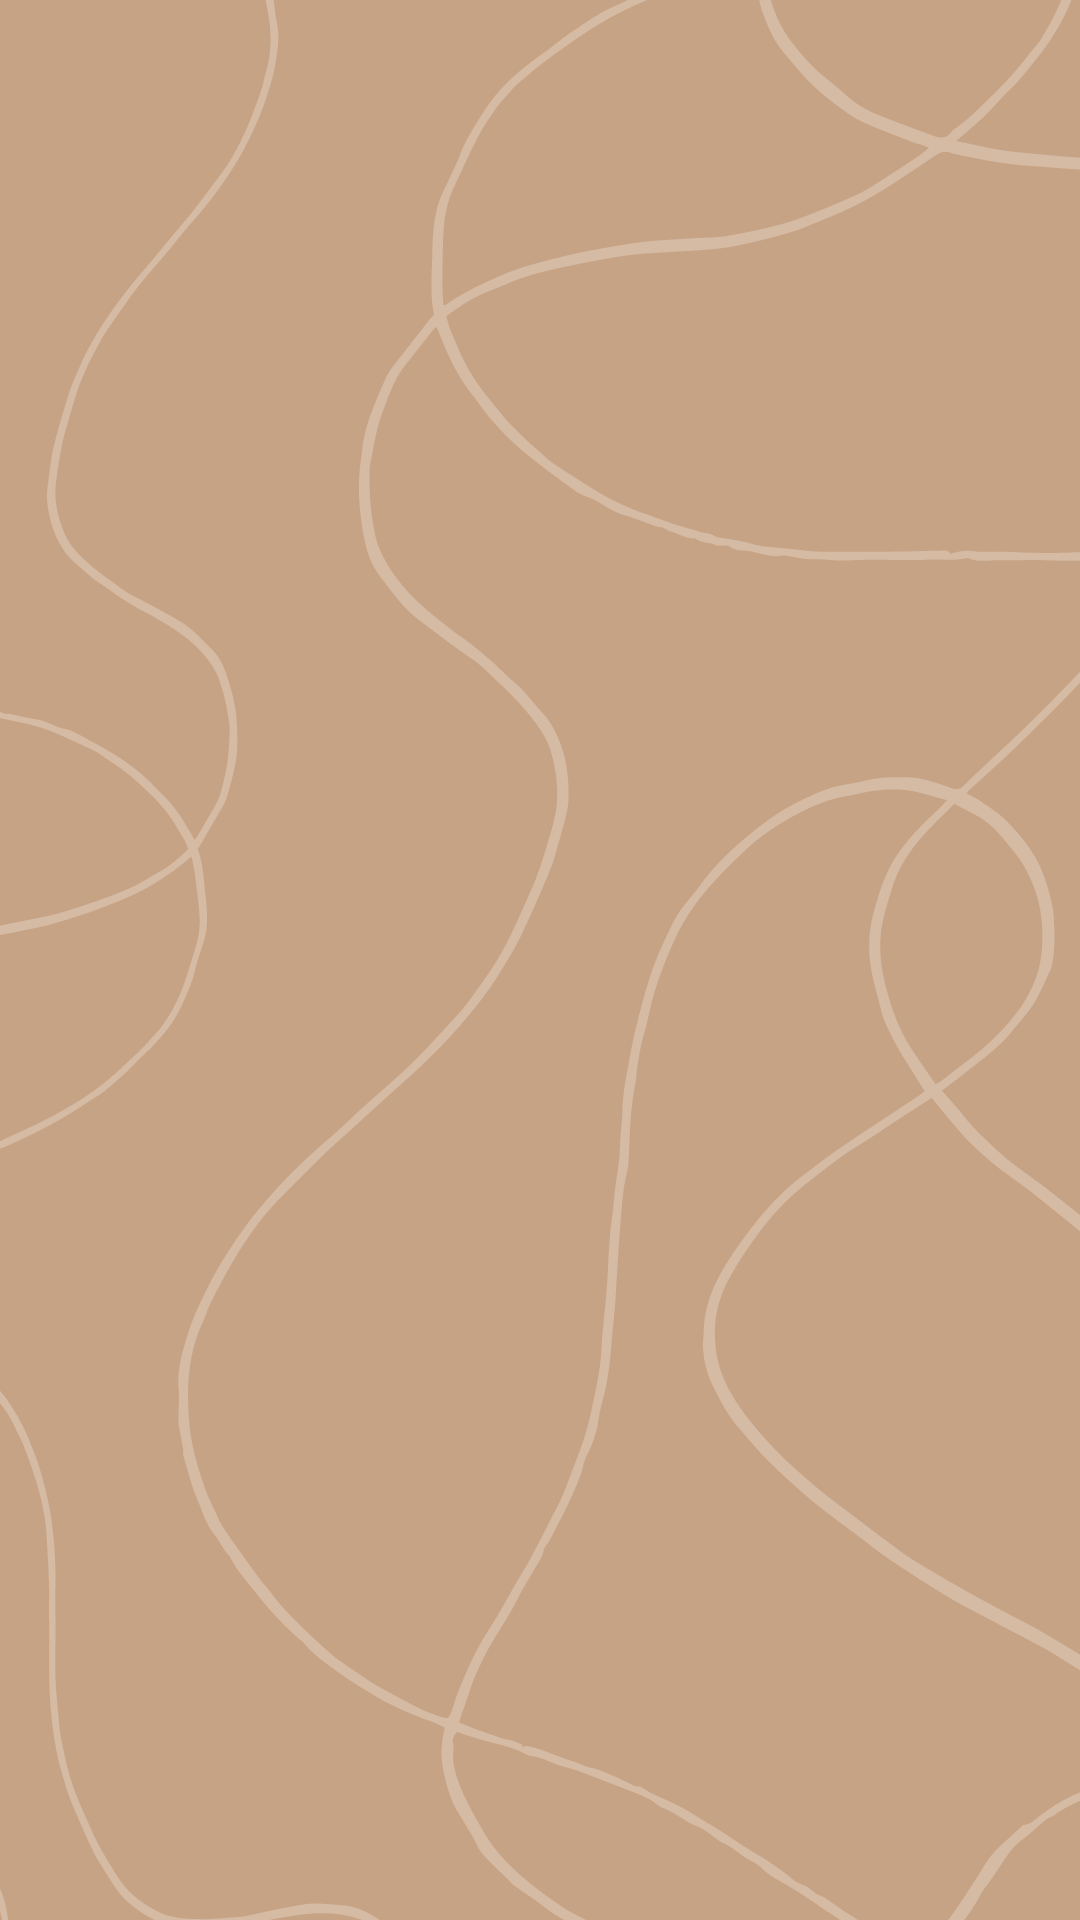 A brown background with abstract white lines. - Minimalist beige